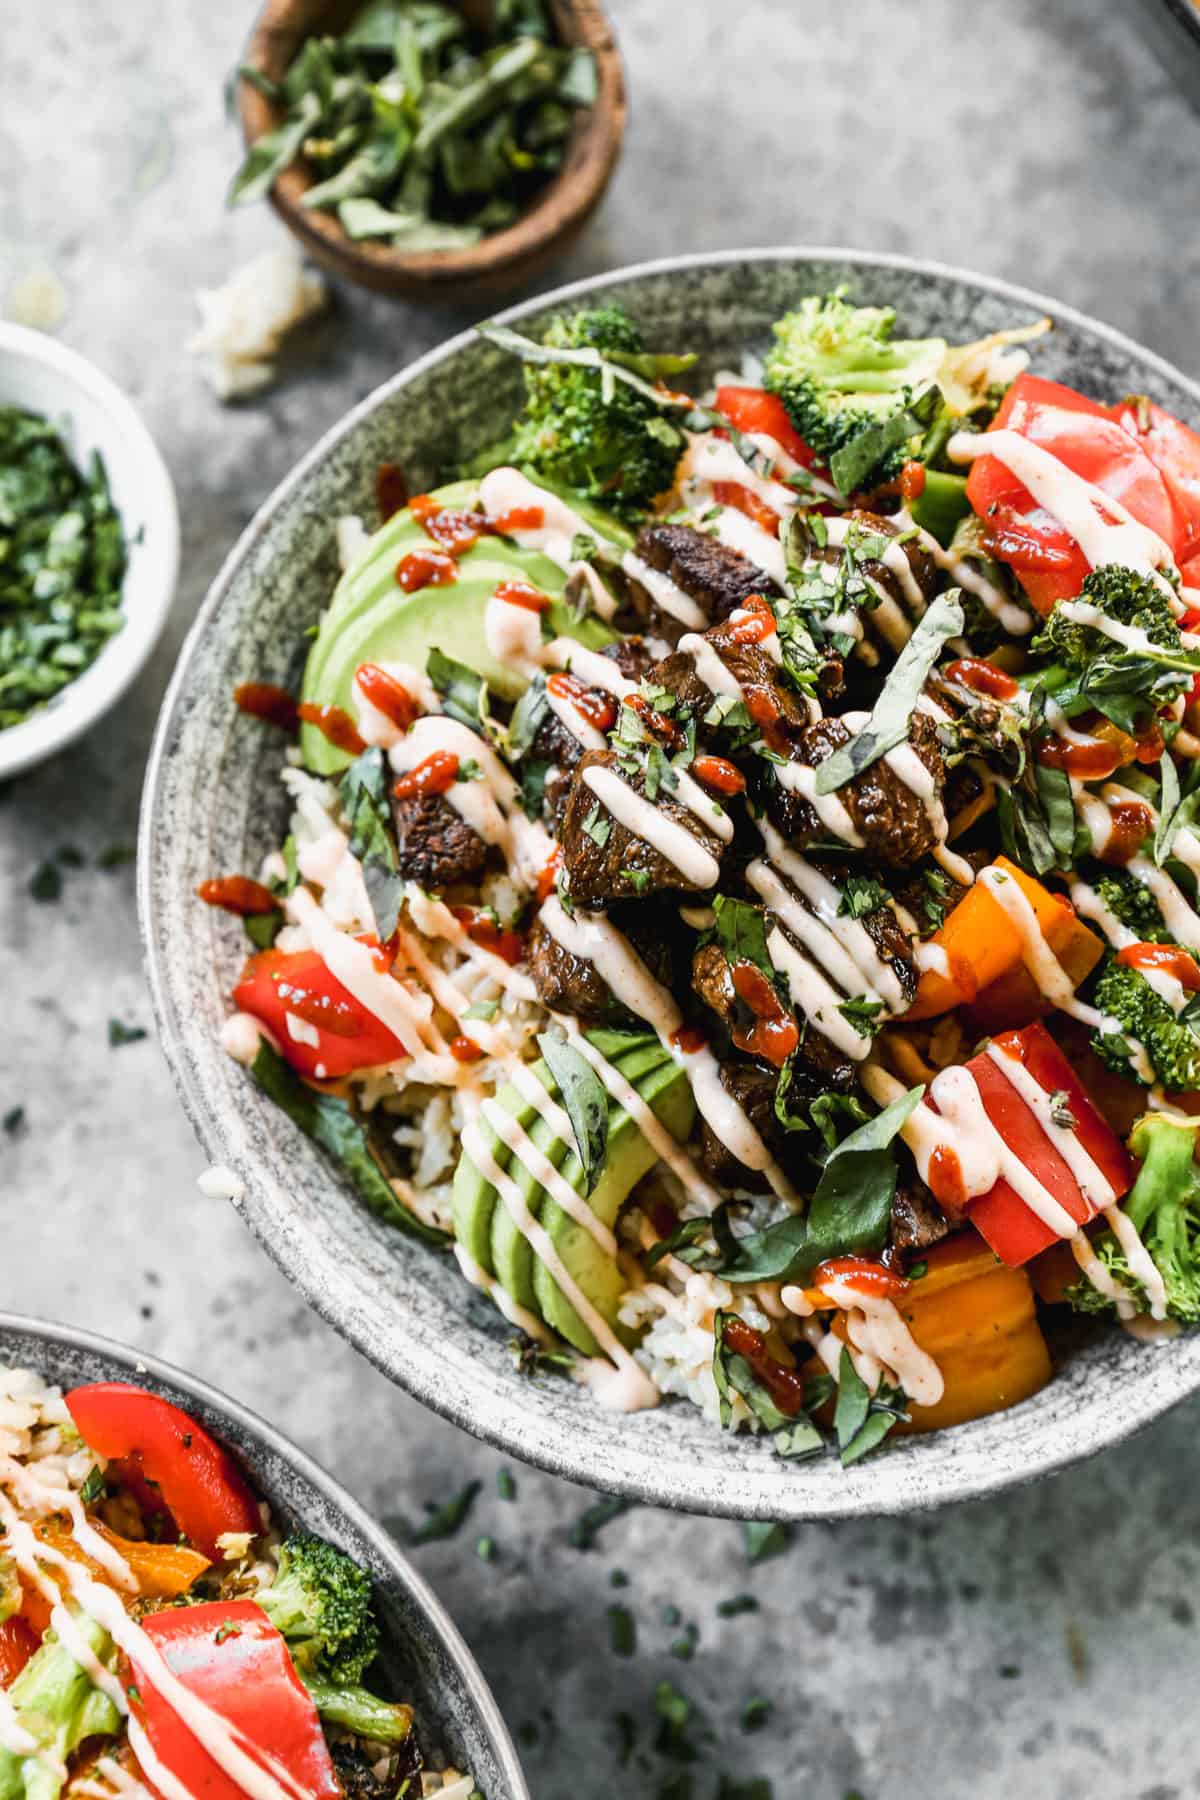 A close up image of a Yumm bowl assembled with steak and fresh sautéed vegetables on top of a bed of rice and topped with avocado and yum yum sauce.